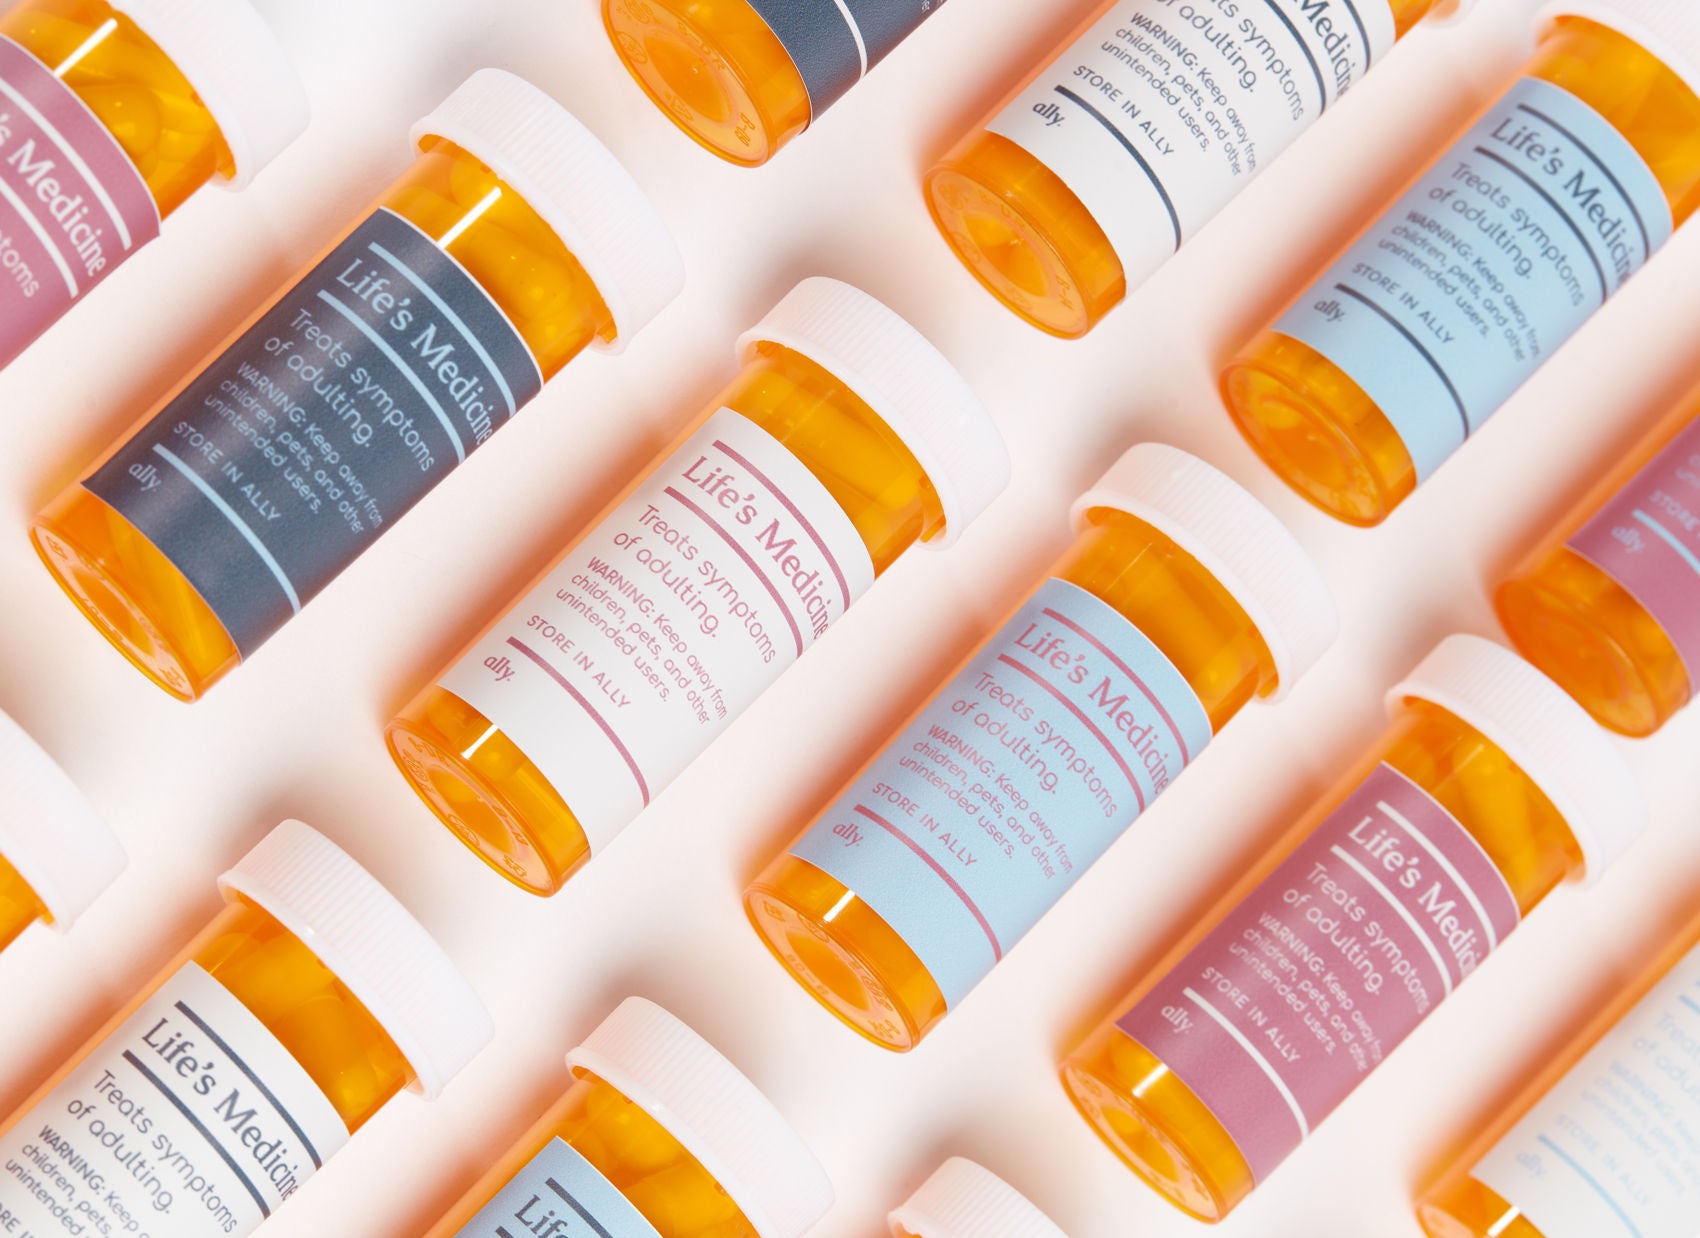 Pill bottles labelled with: Life’s Medicine. Treats symptoms of adulting. Keep away from children and other unintended users. Story in your Ally.